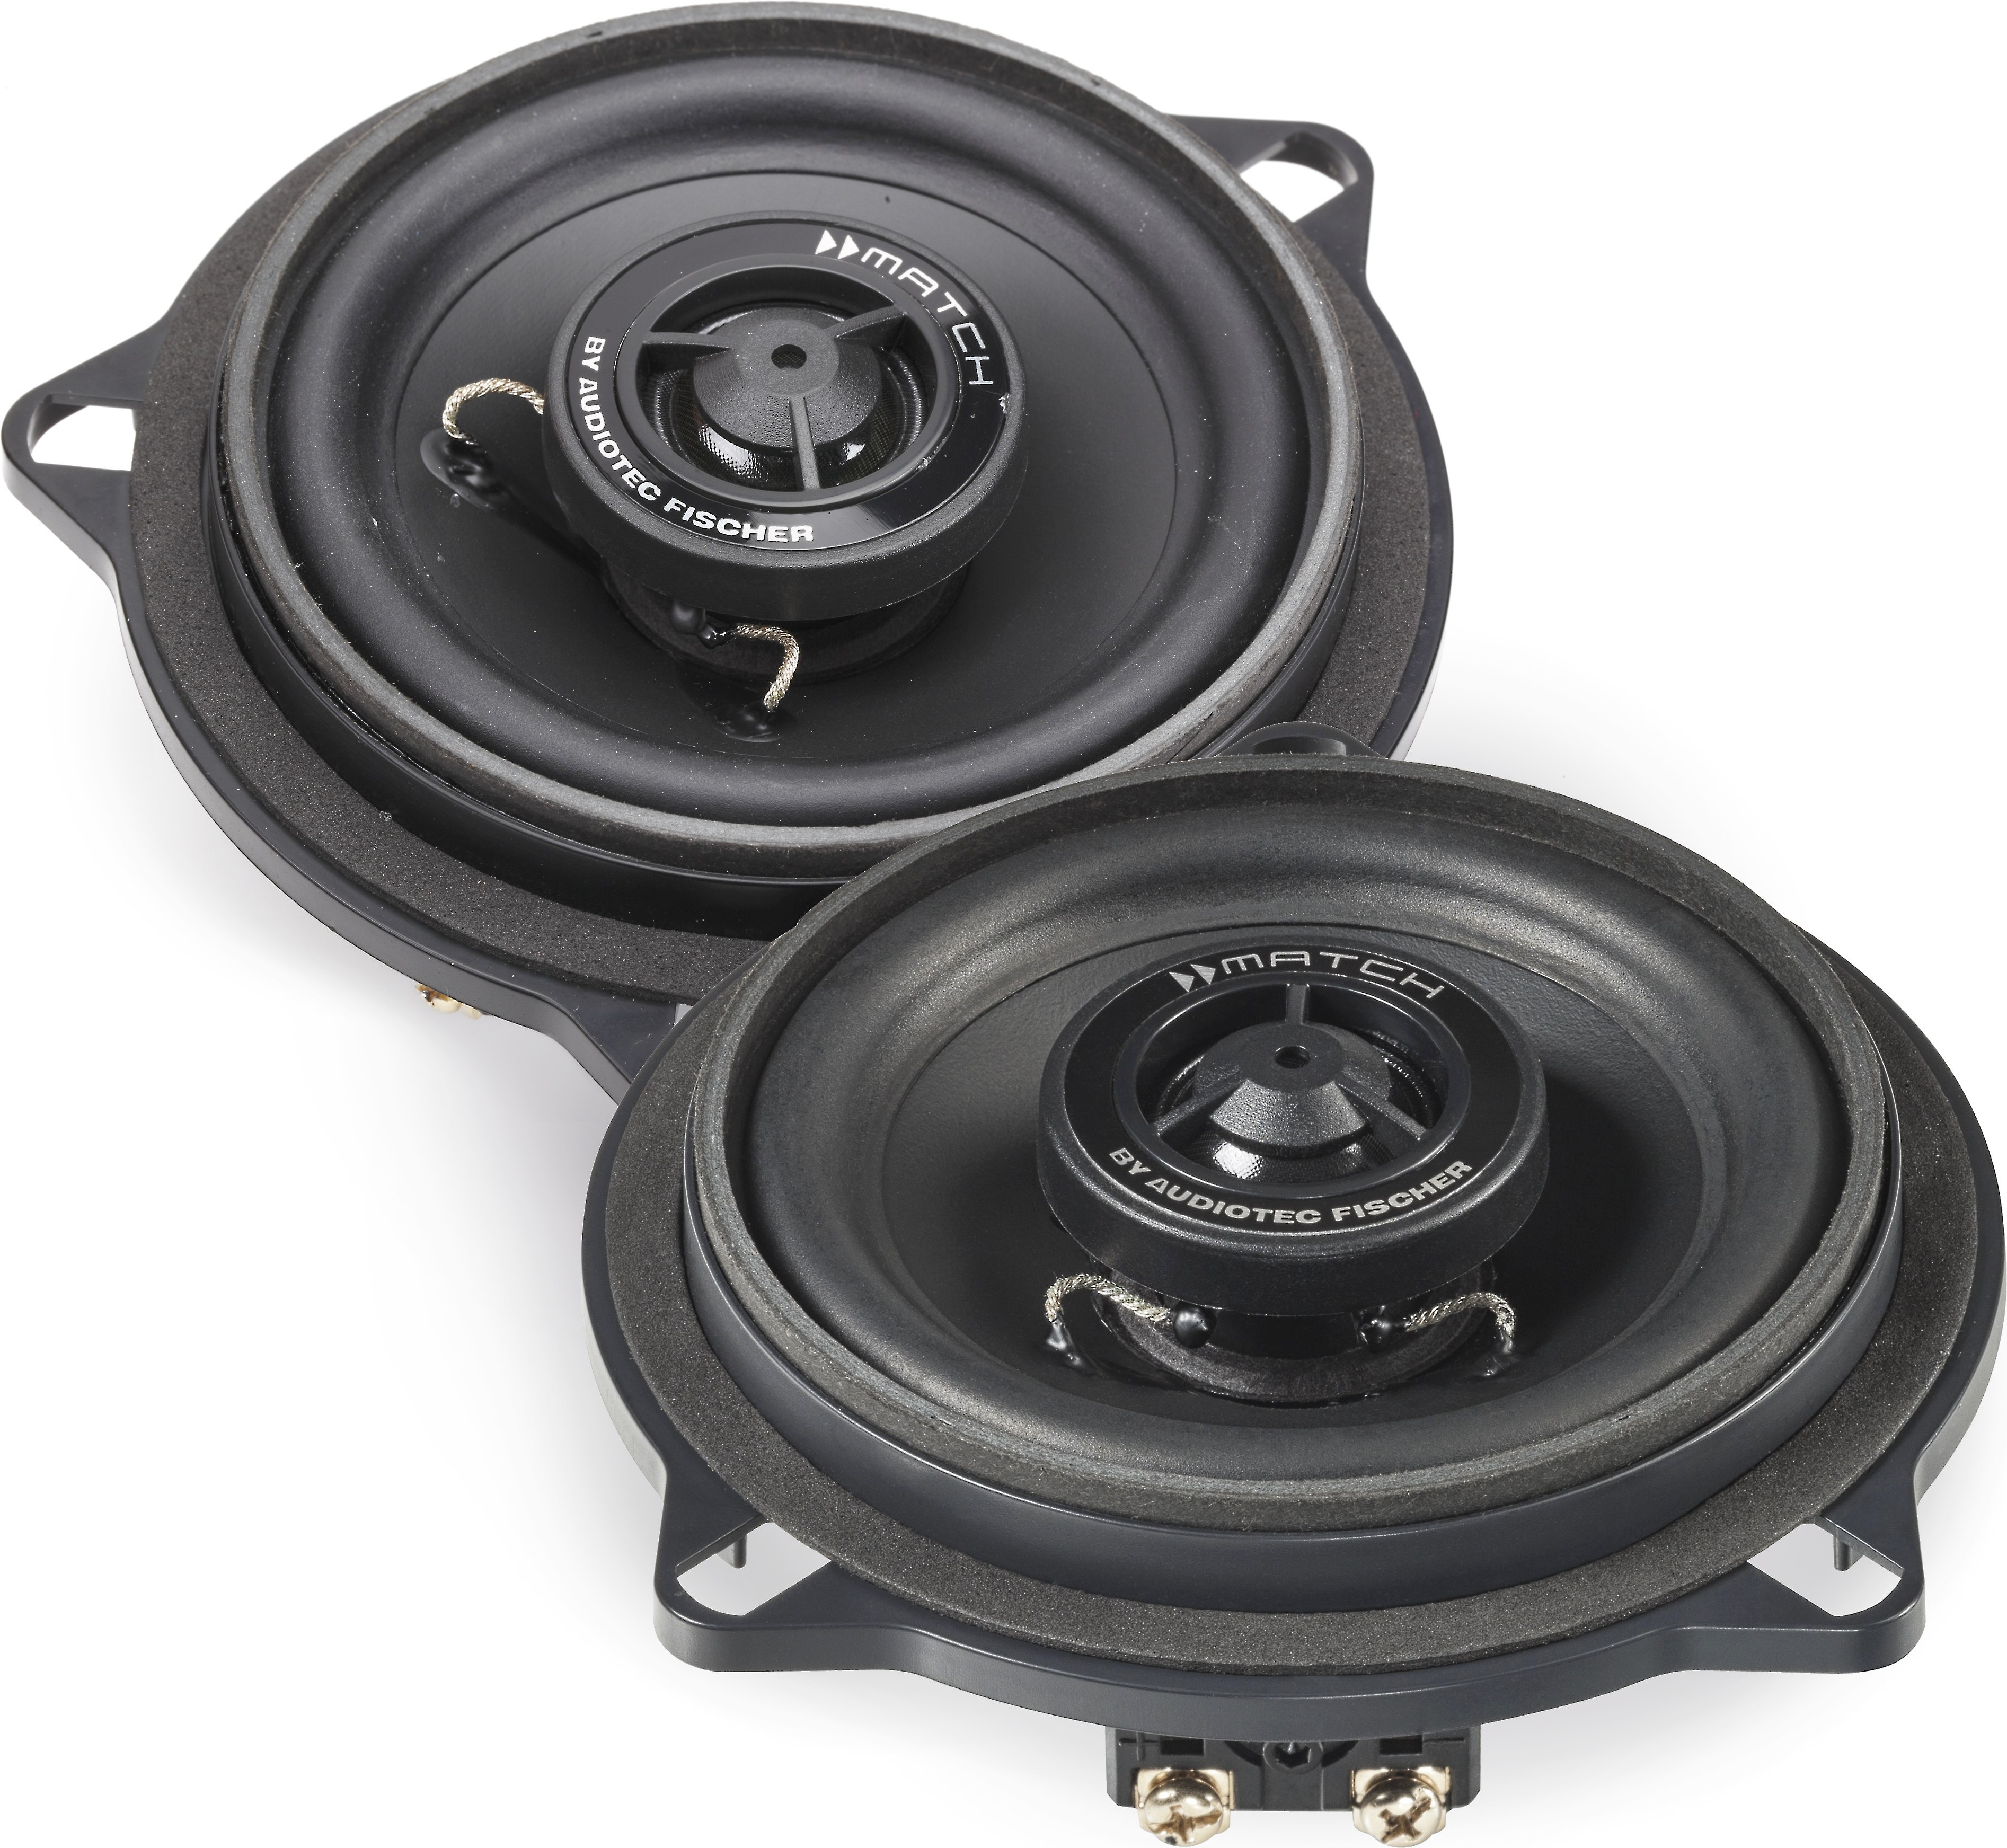 Plateau Mus Fitness Customer Reviews: MATCH MS 4X-BMW.1 2-way coaxial speakers designed for  select BMW models at Crutchfield